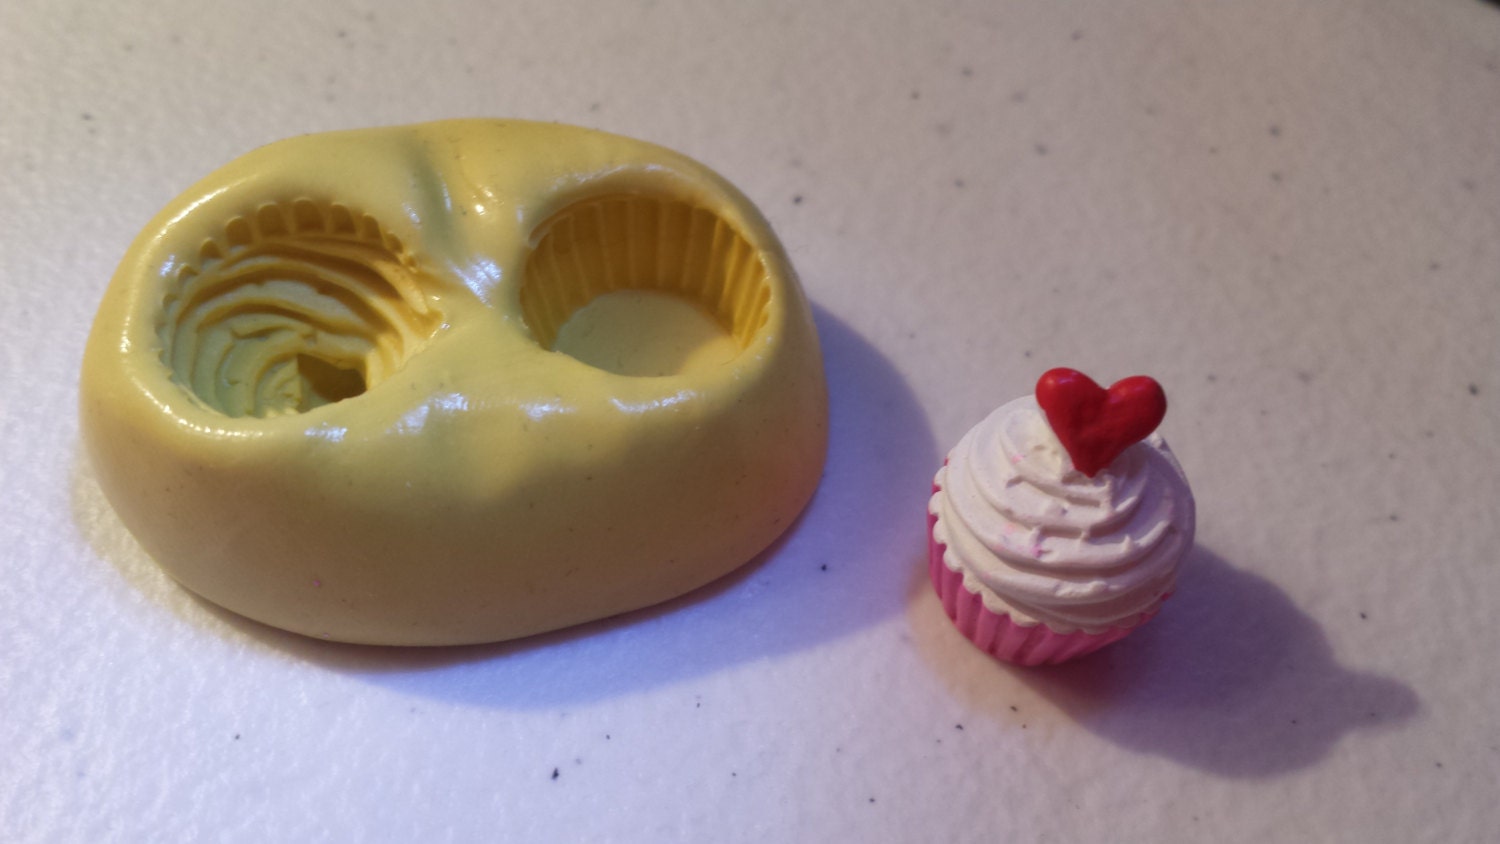 Silicone Molds [Lion, 4 Cup] Cupcake Baking Pan - Free Paper Muffin Cu —  Freshware